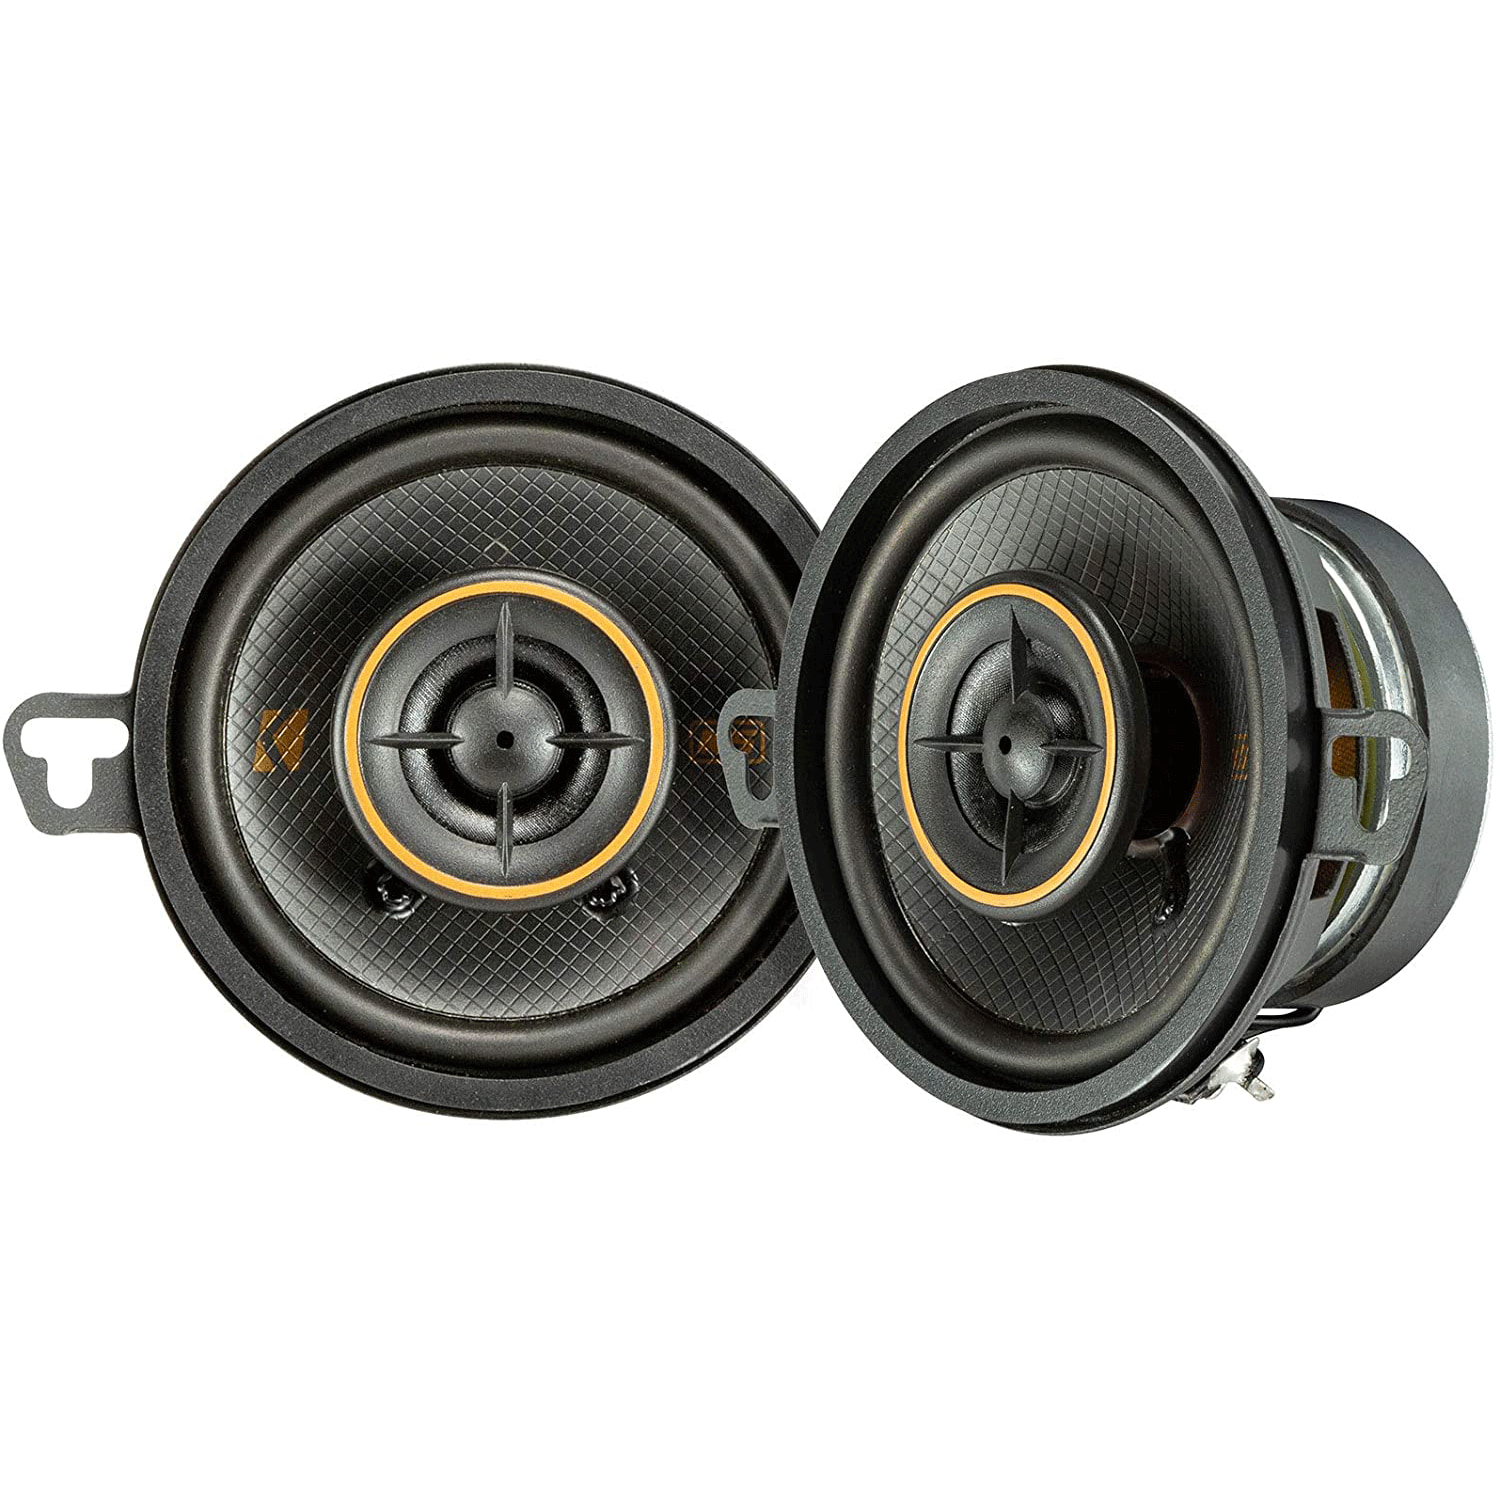 3.5" Car Stereo Speaker Pair.Marine Car replacement.shallow Mount.3-1/2" NEW 2 